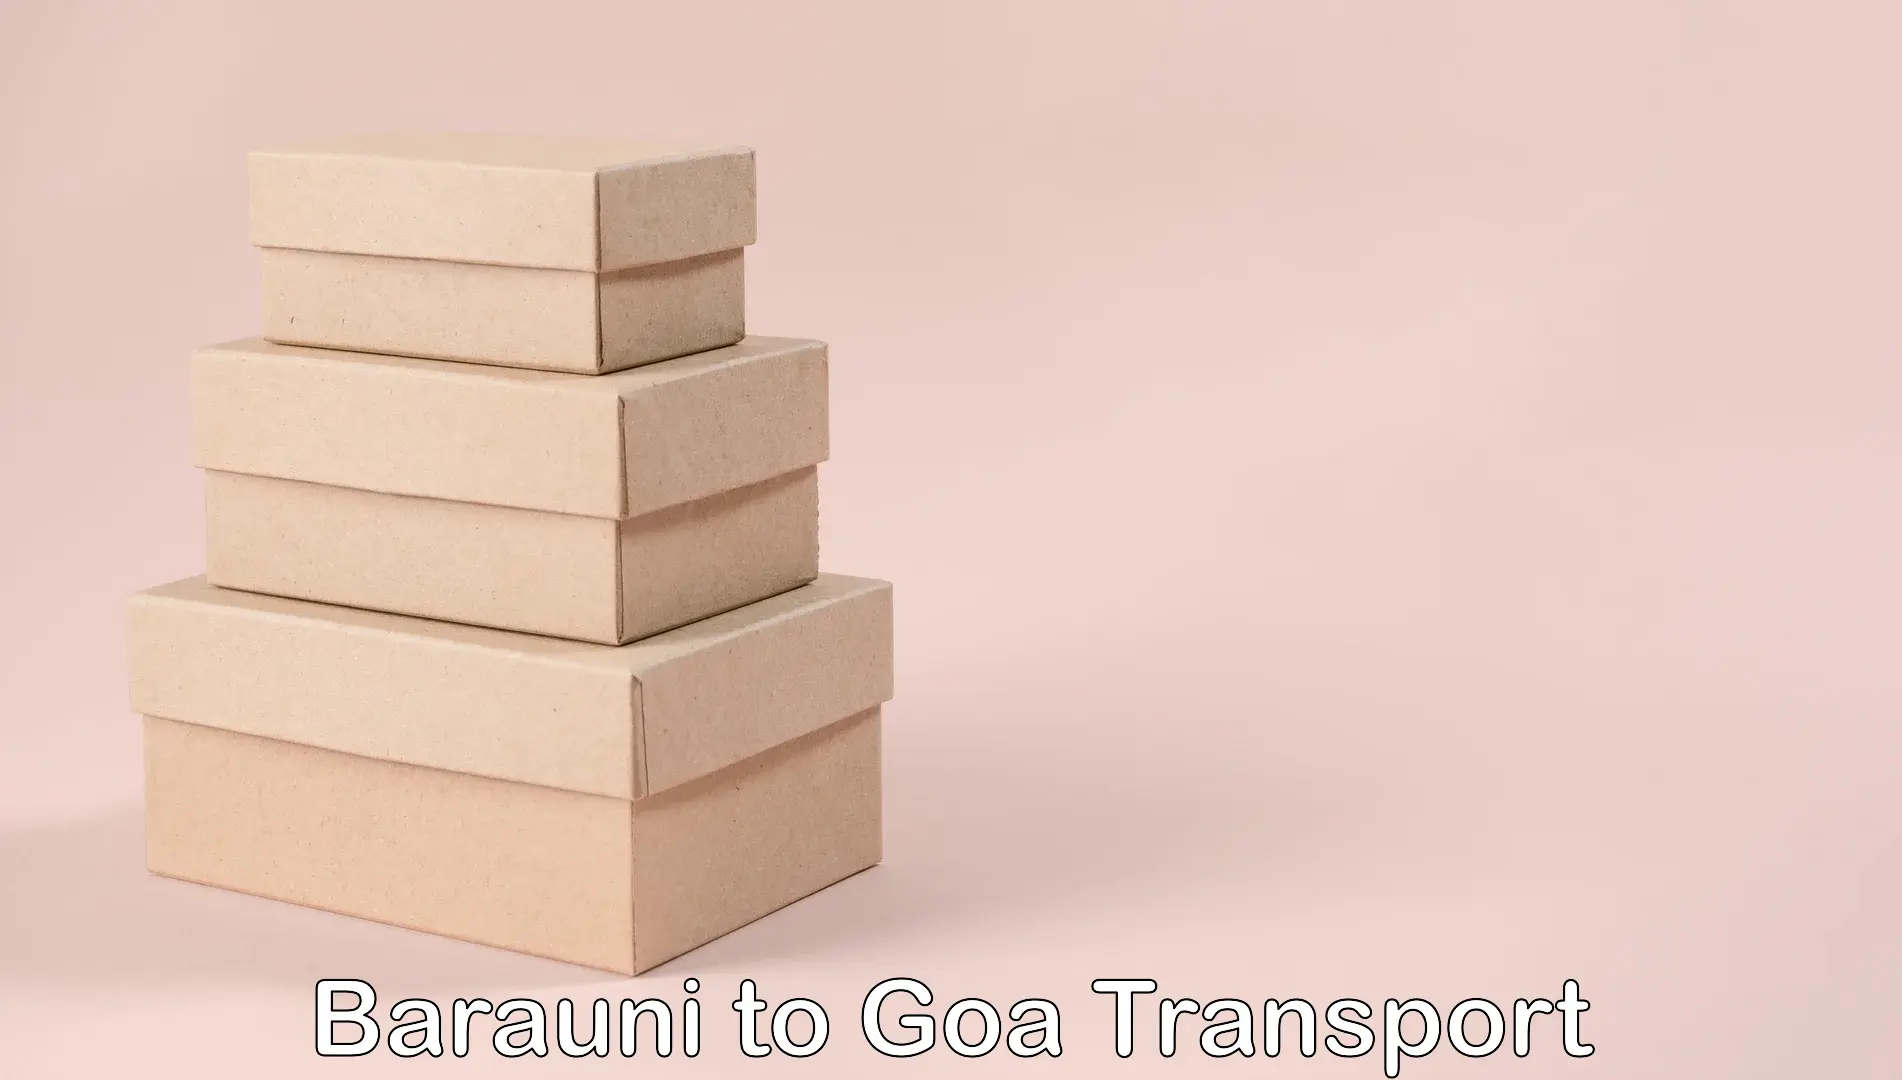 Commercial transport service Barauni to Goa